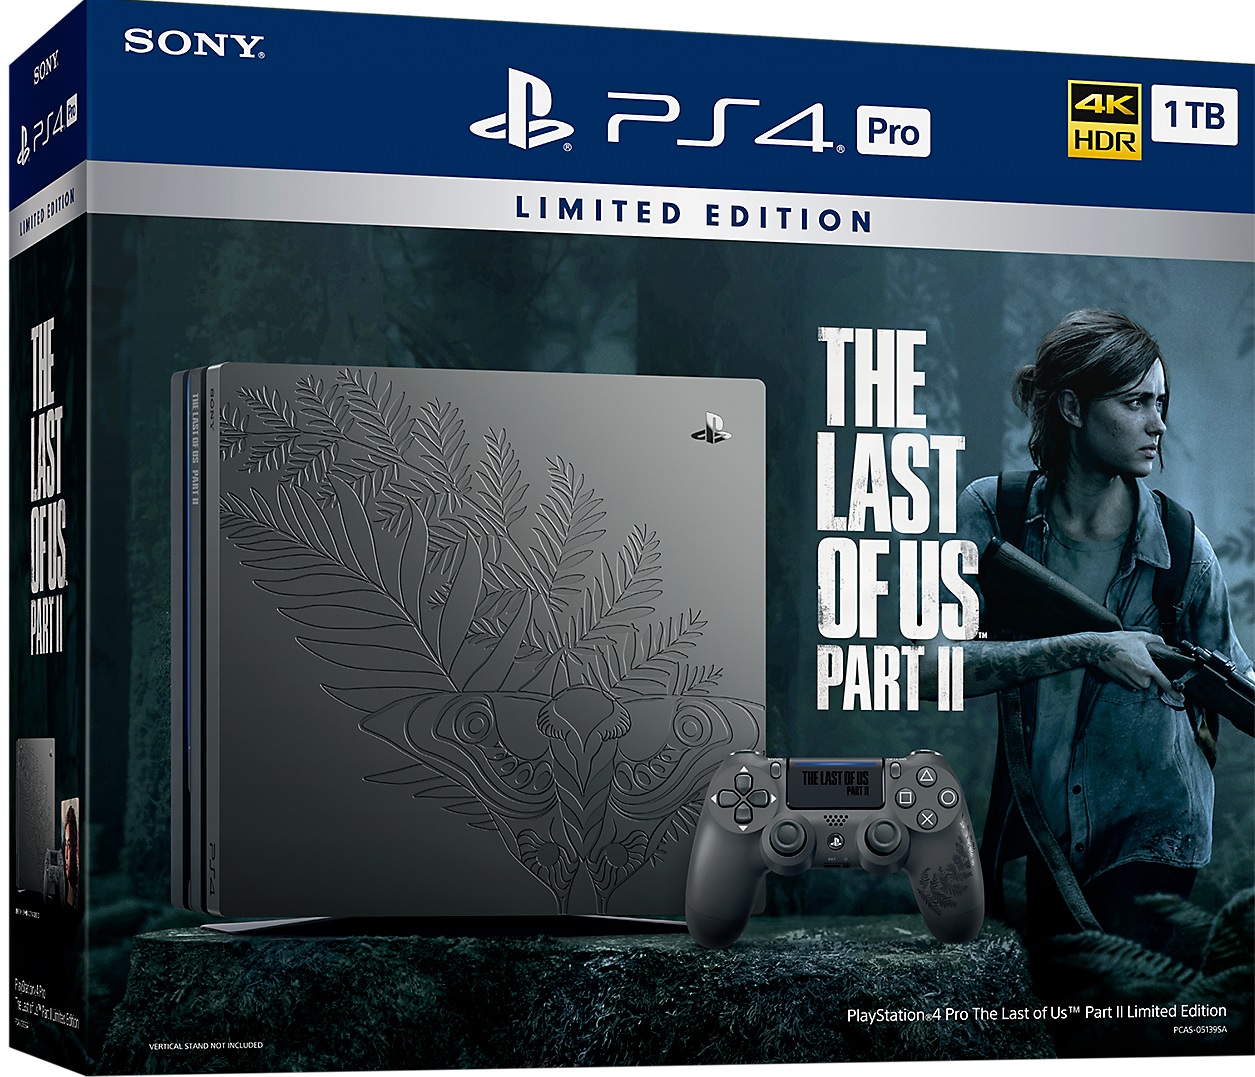 Sony PlayStation 4 Pro 1TB + The Last of Us Part II Limited Edition 